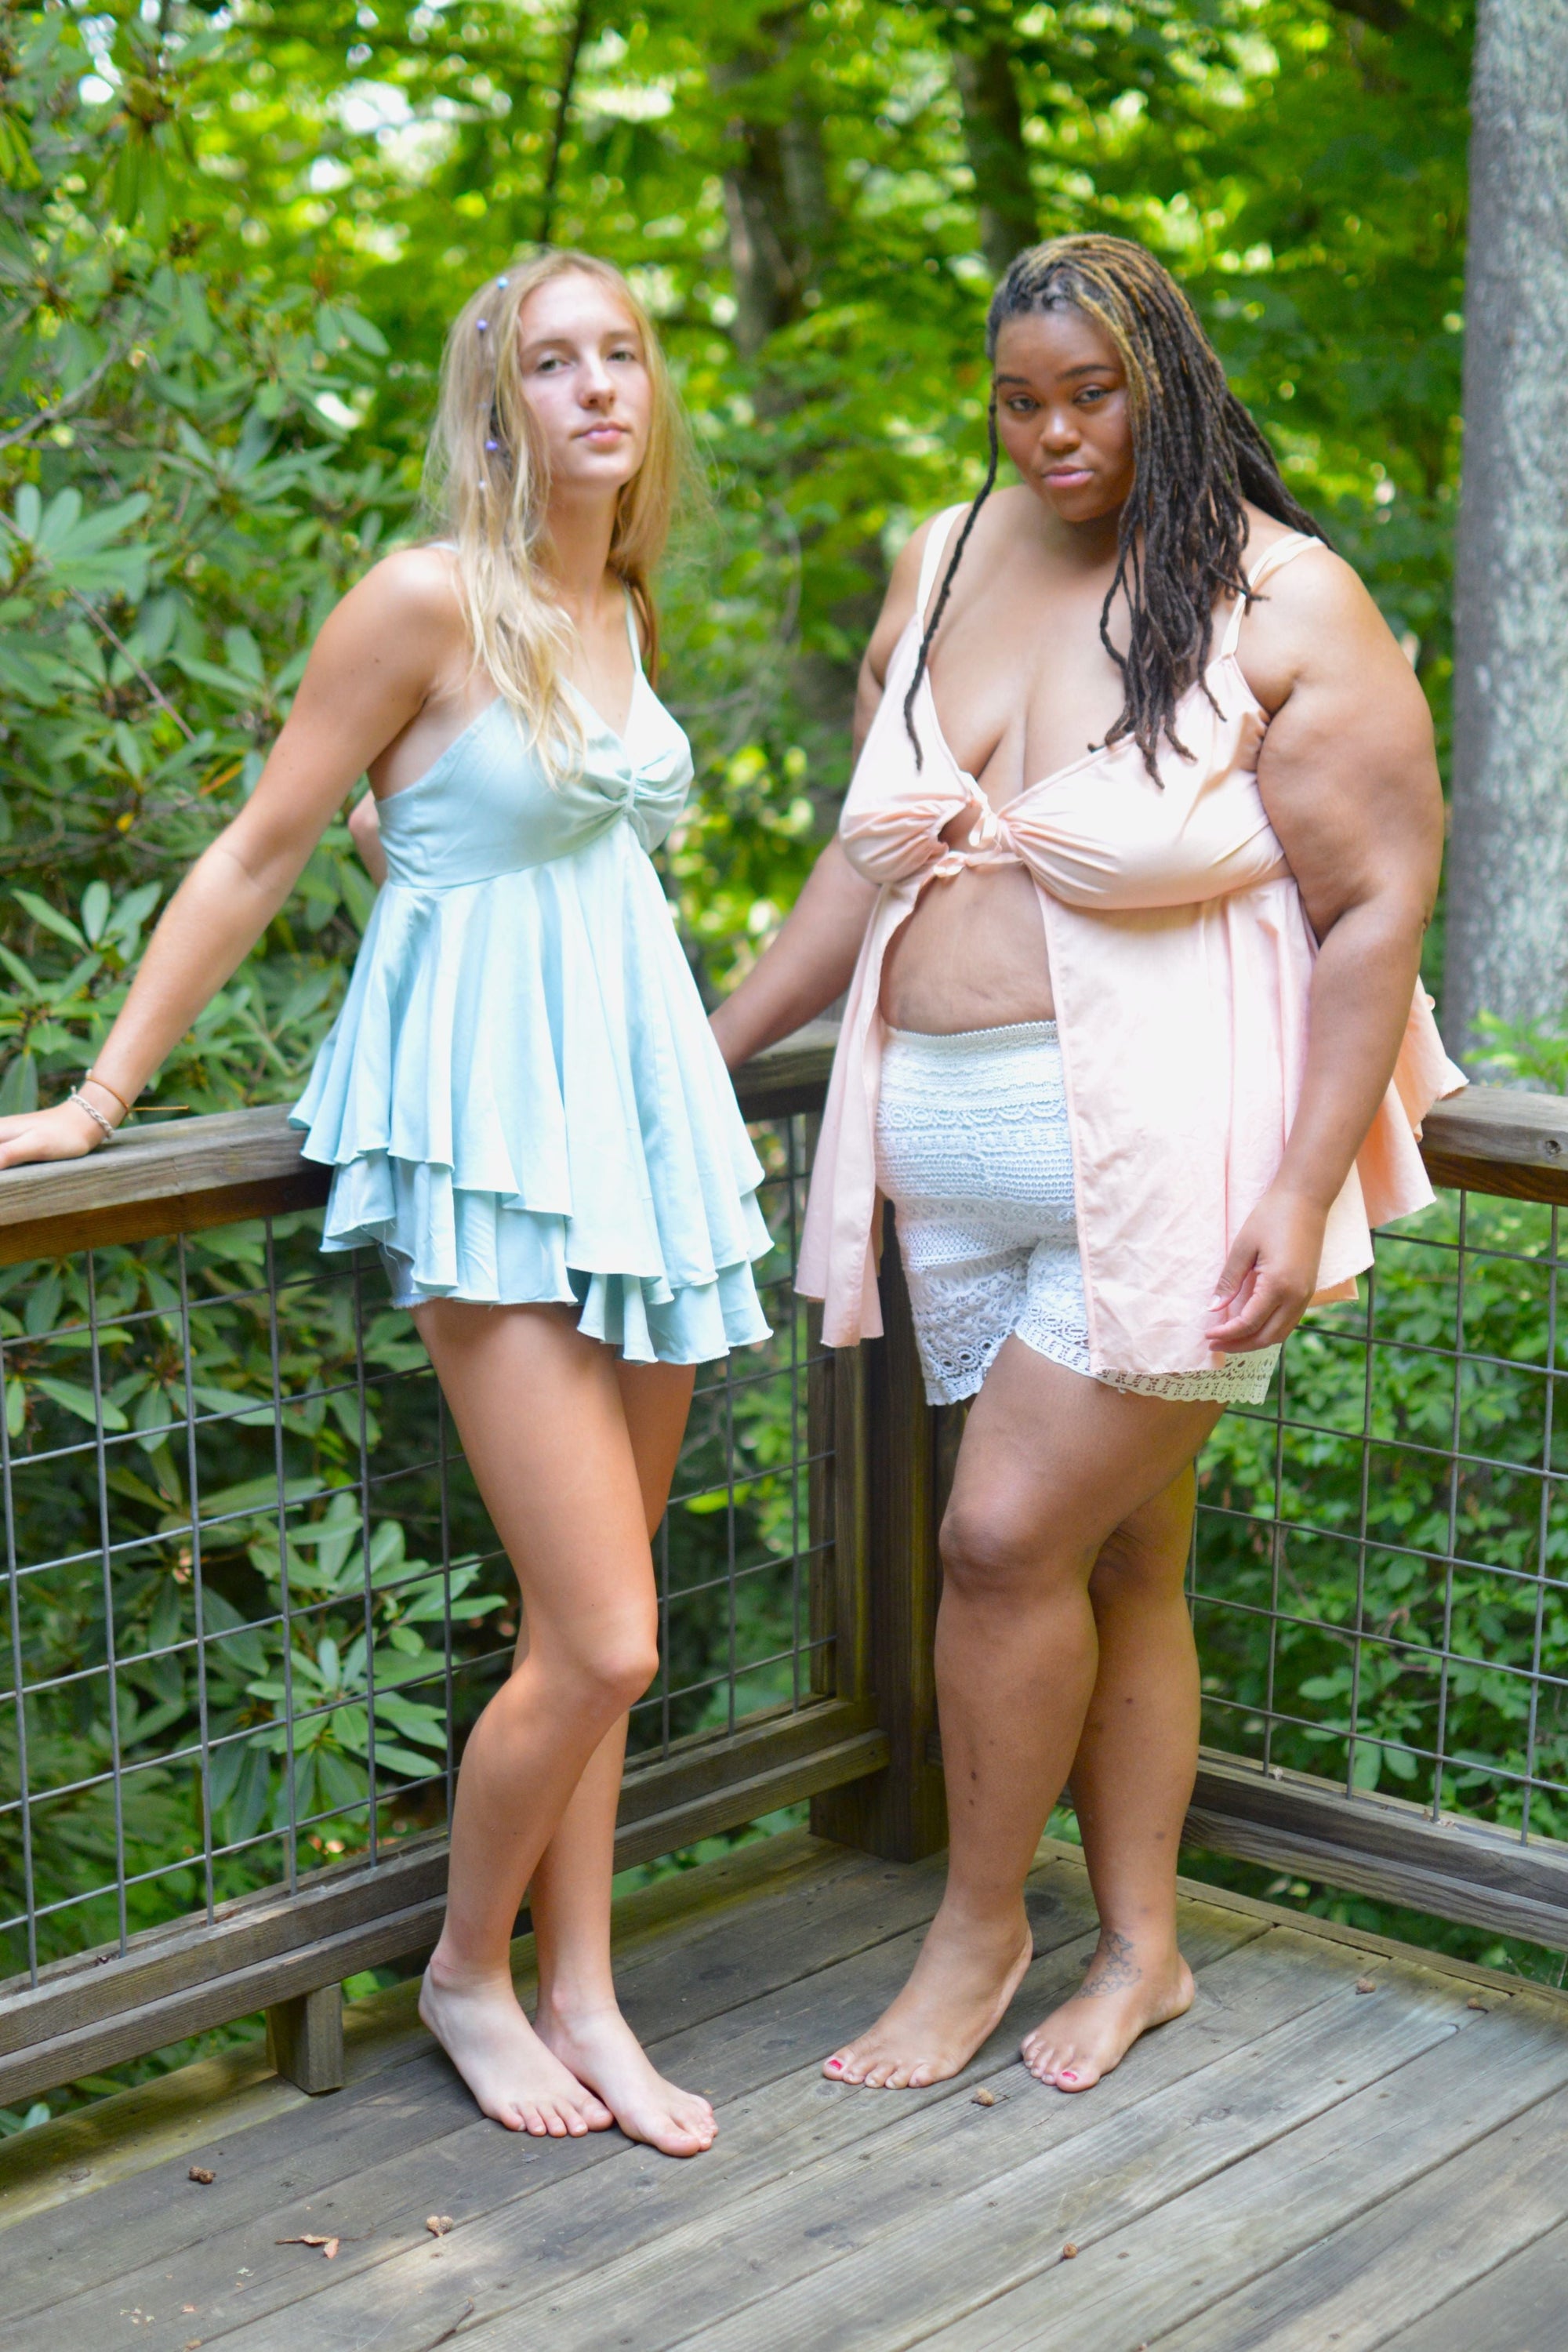 Two woman standing on a wooden porch with forest background.  One is wearing a light blue lingerie dress and the other is wearing a peach colored lingerie top that is open in center front.